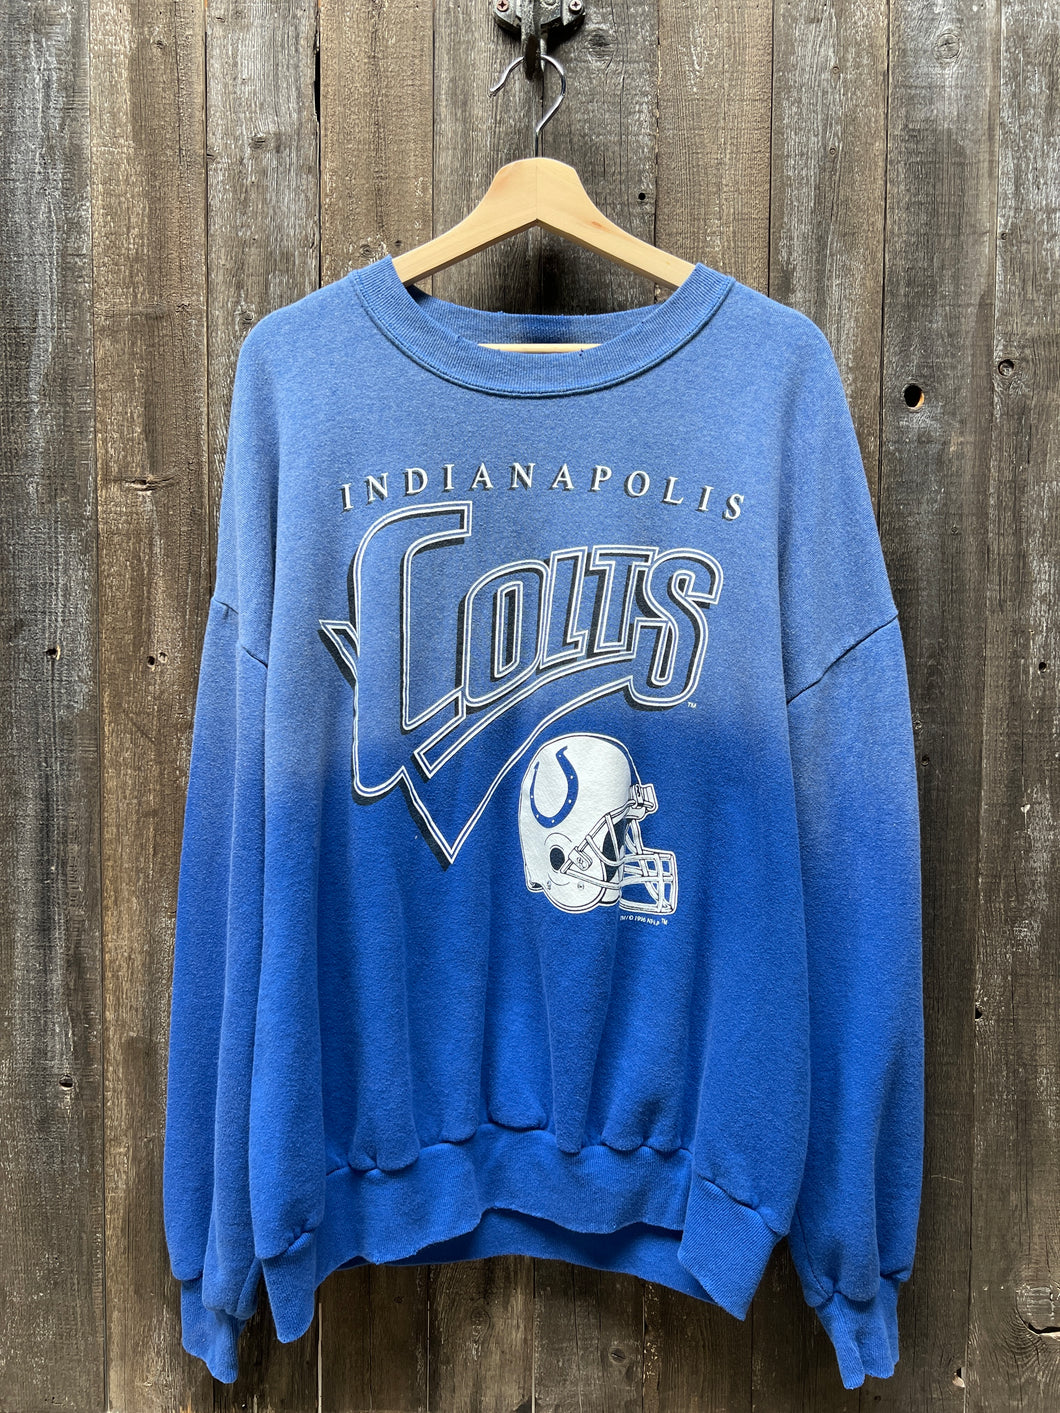 Colts Sweatshirt -XL-Customize Your Embroidery Wording